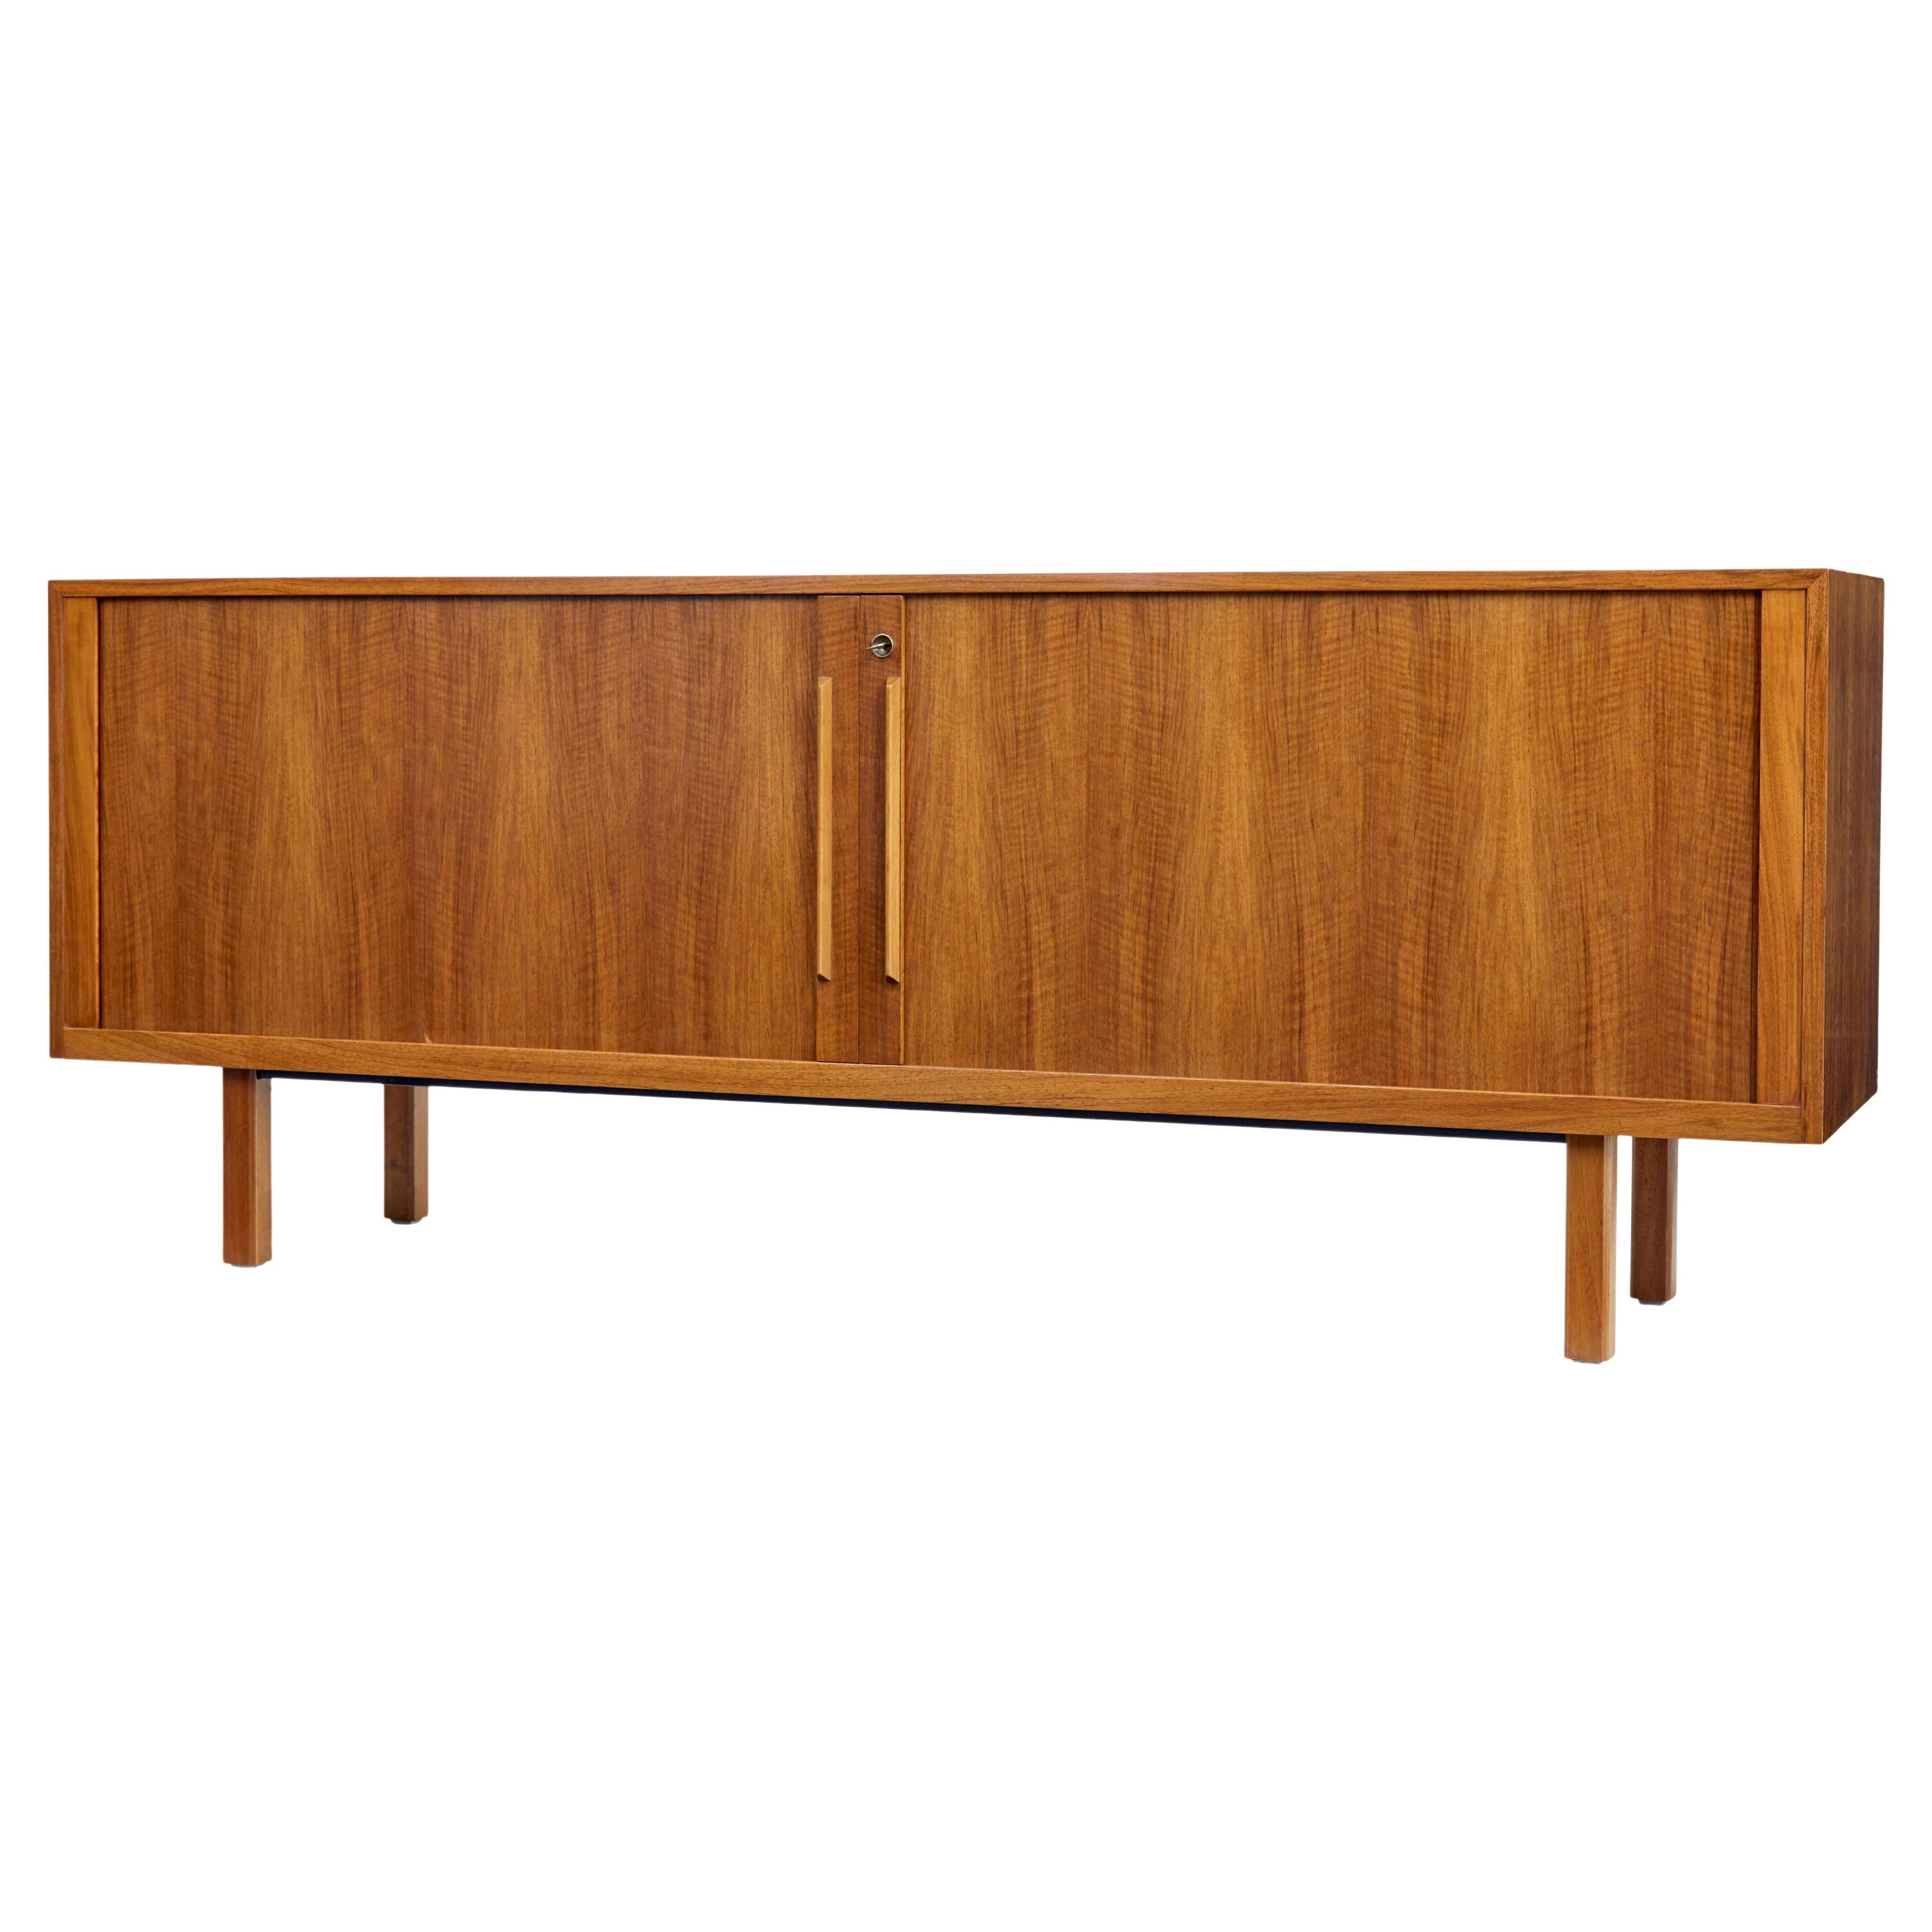 20th century Swedish teak tambour front sideboard by Atvidabergs For Sale